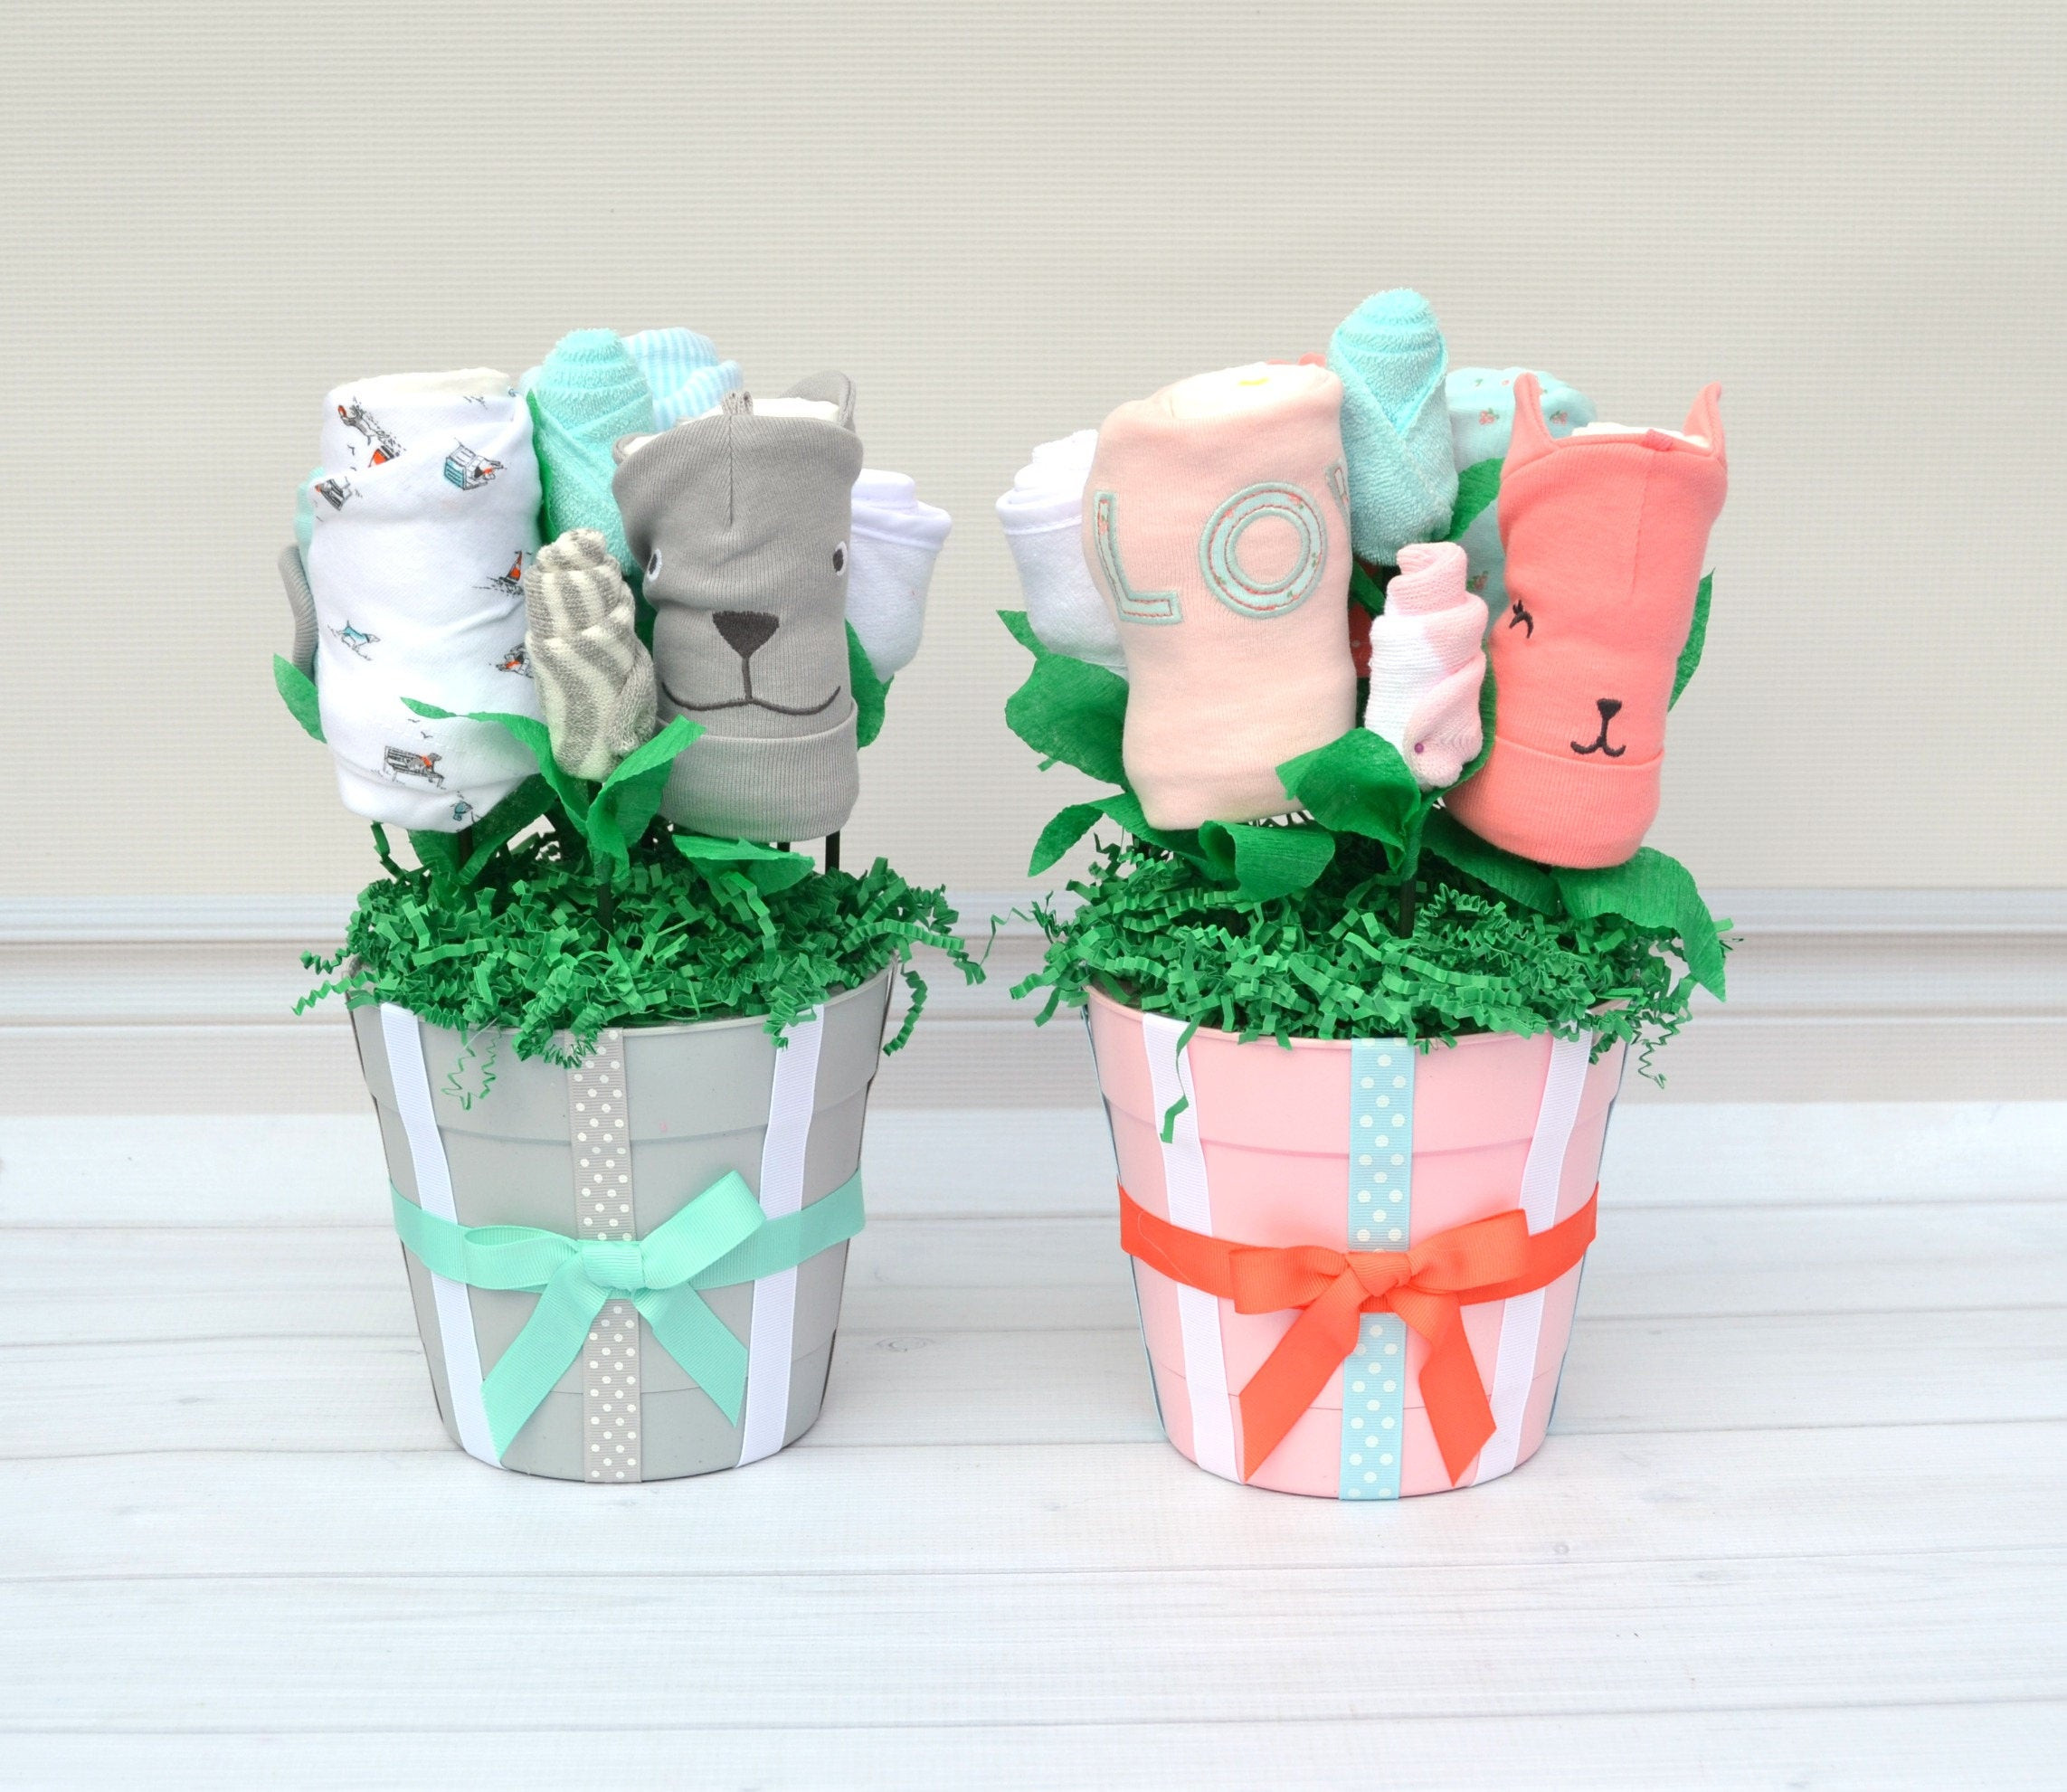 Gift Ideas For Twin Boys
 Girl Boy Twin Gifts Baby Gift for Boy Girl Twins Newborn